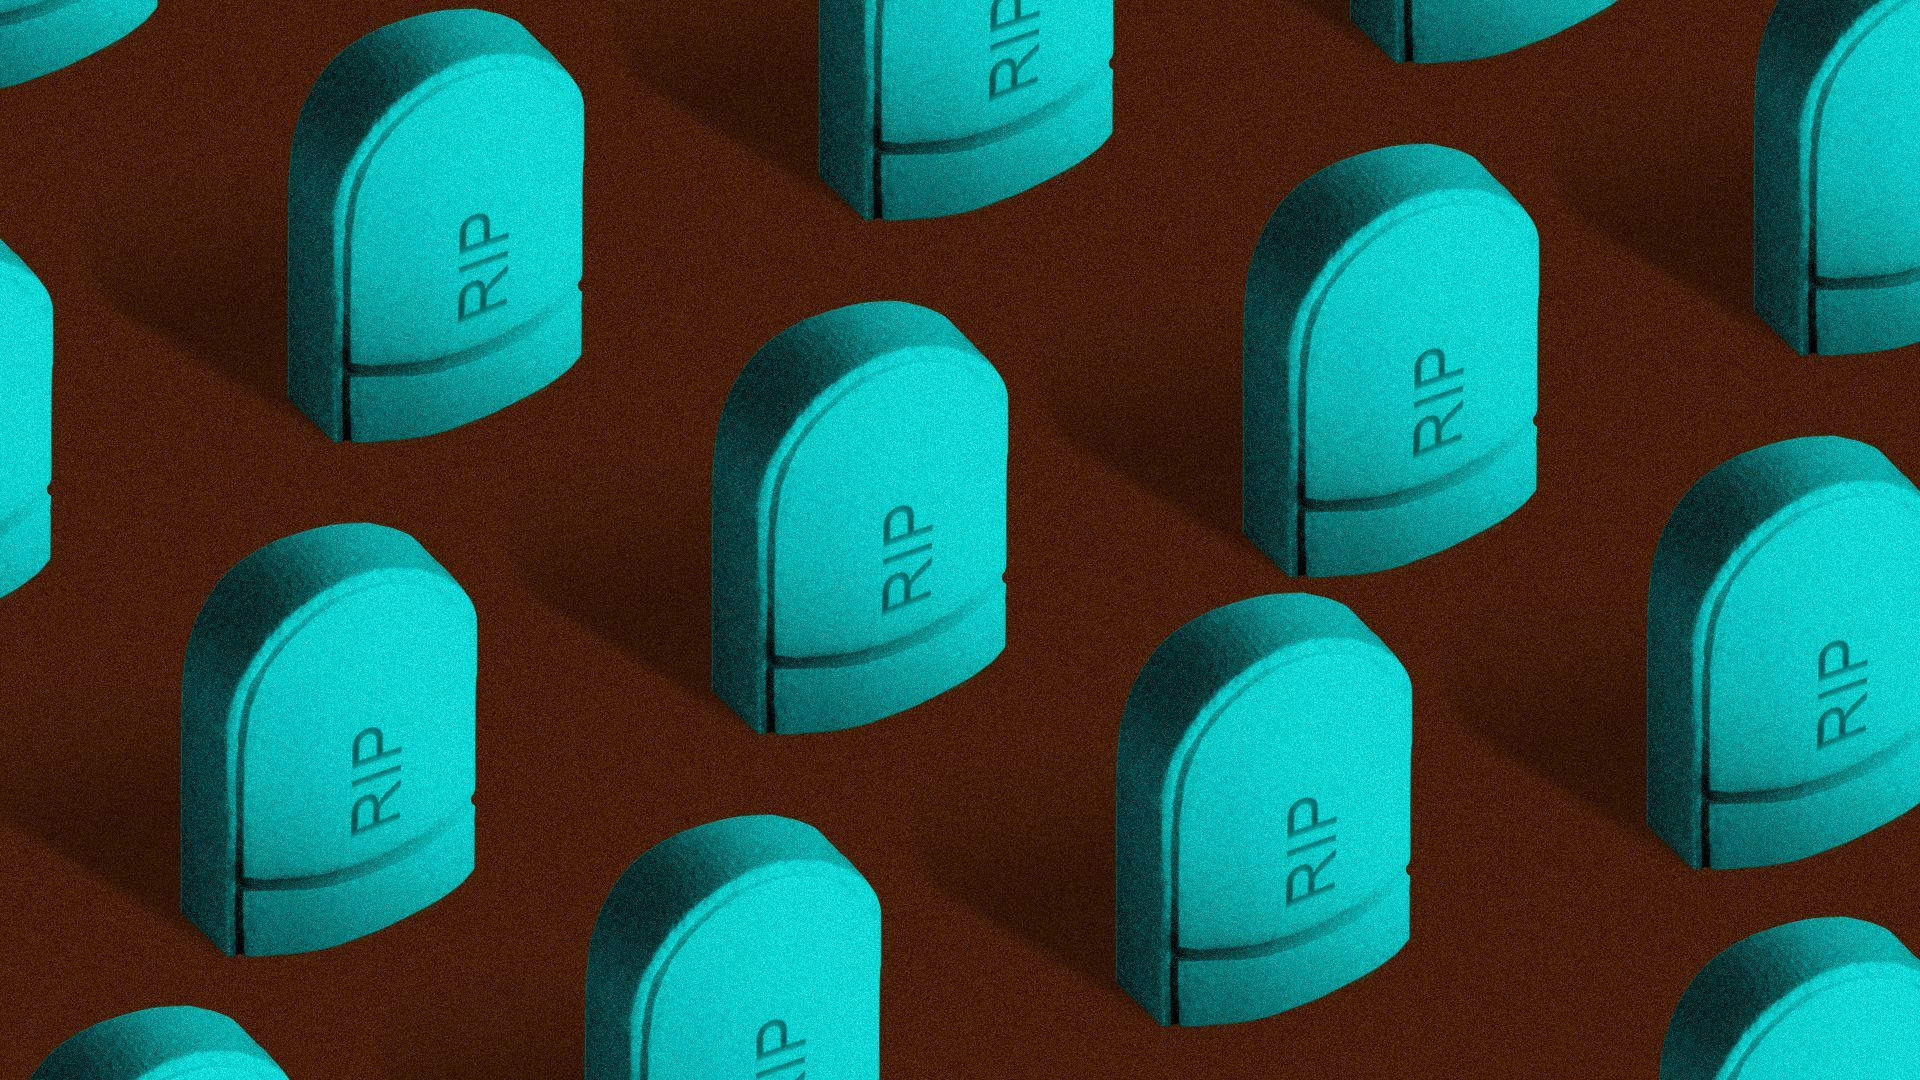 An illustration of light blue pills in a brown background appearing as gravestones with "RIP" on each